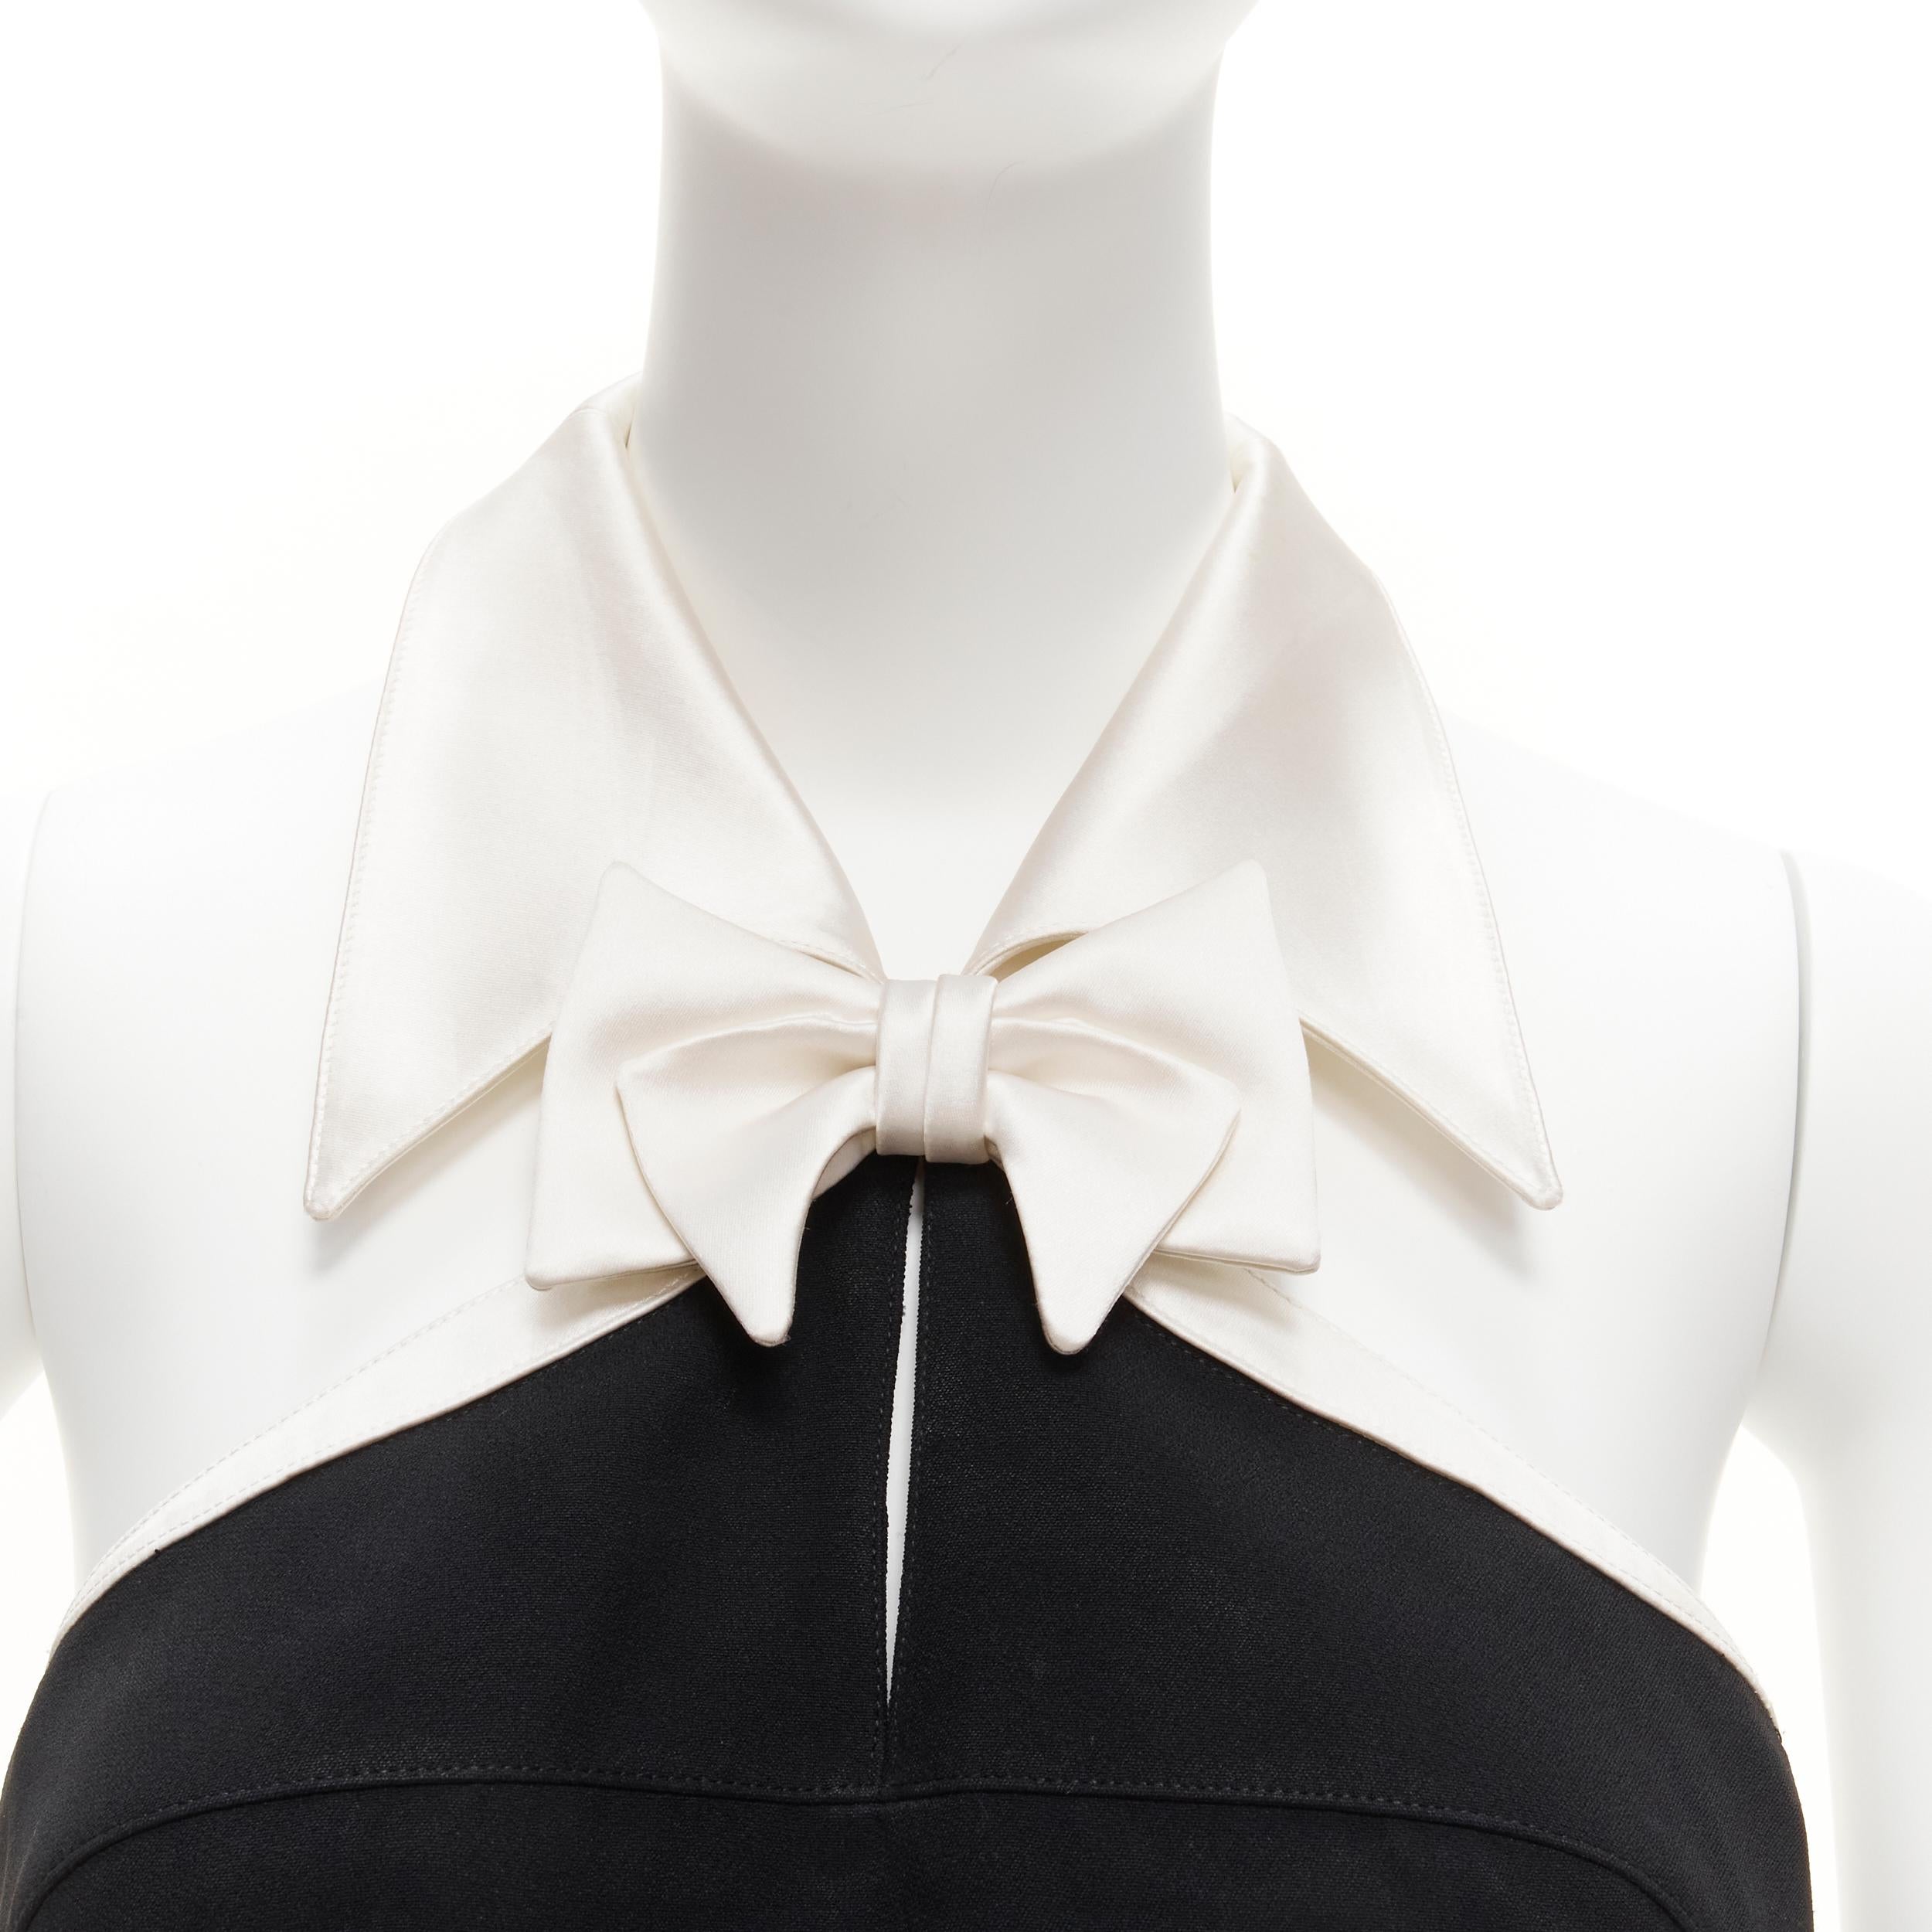 THIERRY MUGLER Vintage white Vampire halter bow collar black tux mini dress IT40 S
Reference: TGAS/C02071
Brand: Thierry Mugler
Designer: Thierry Mugler
Material: Viscose, Acetate
Color: Black, White
Pattern: Solid
Closure: Zip
Lining: Black